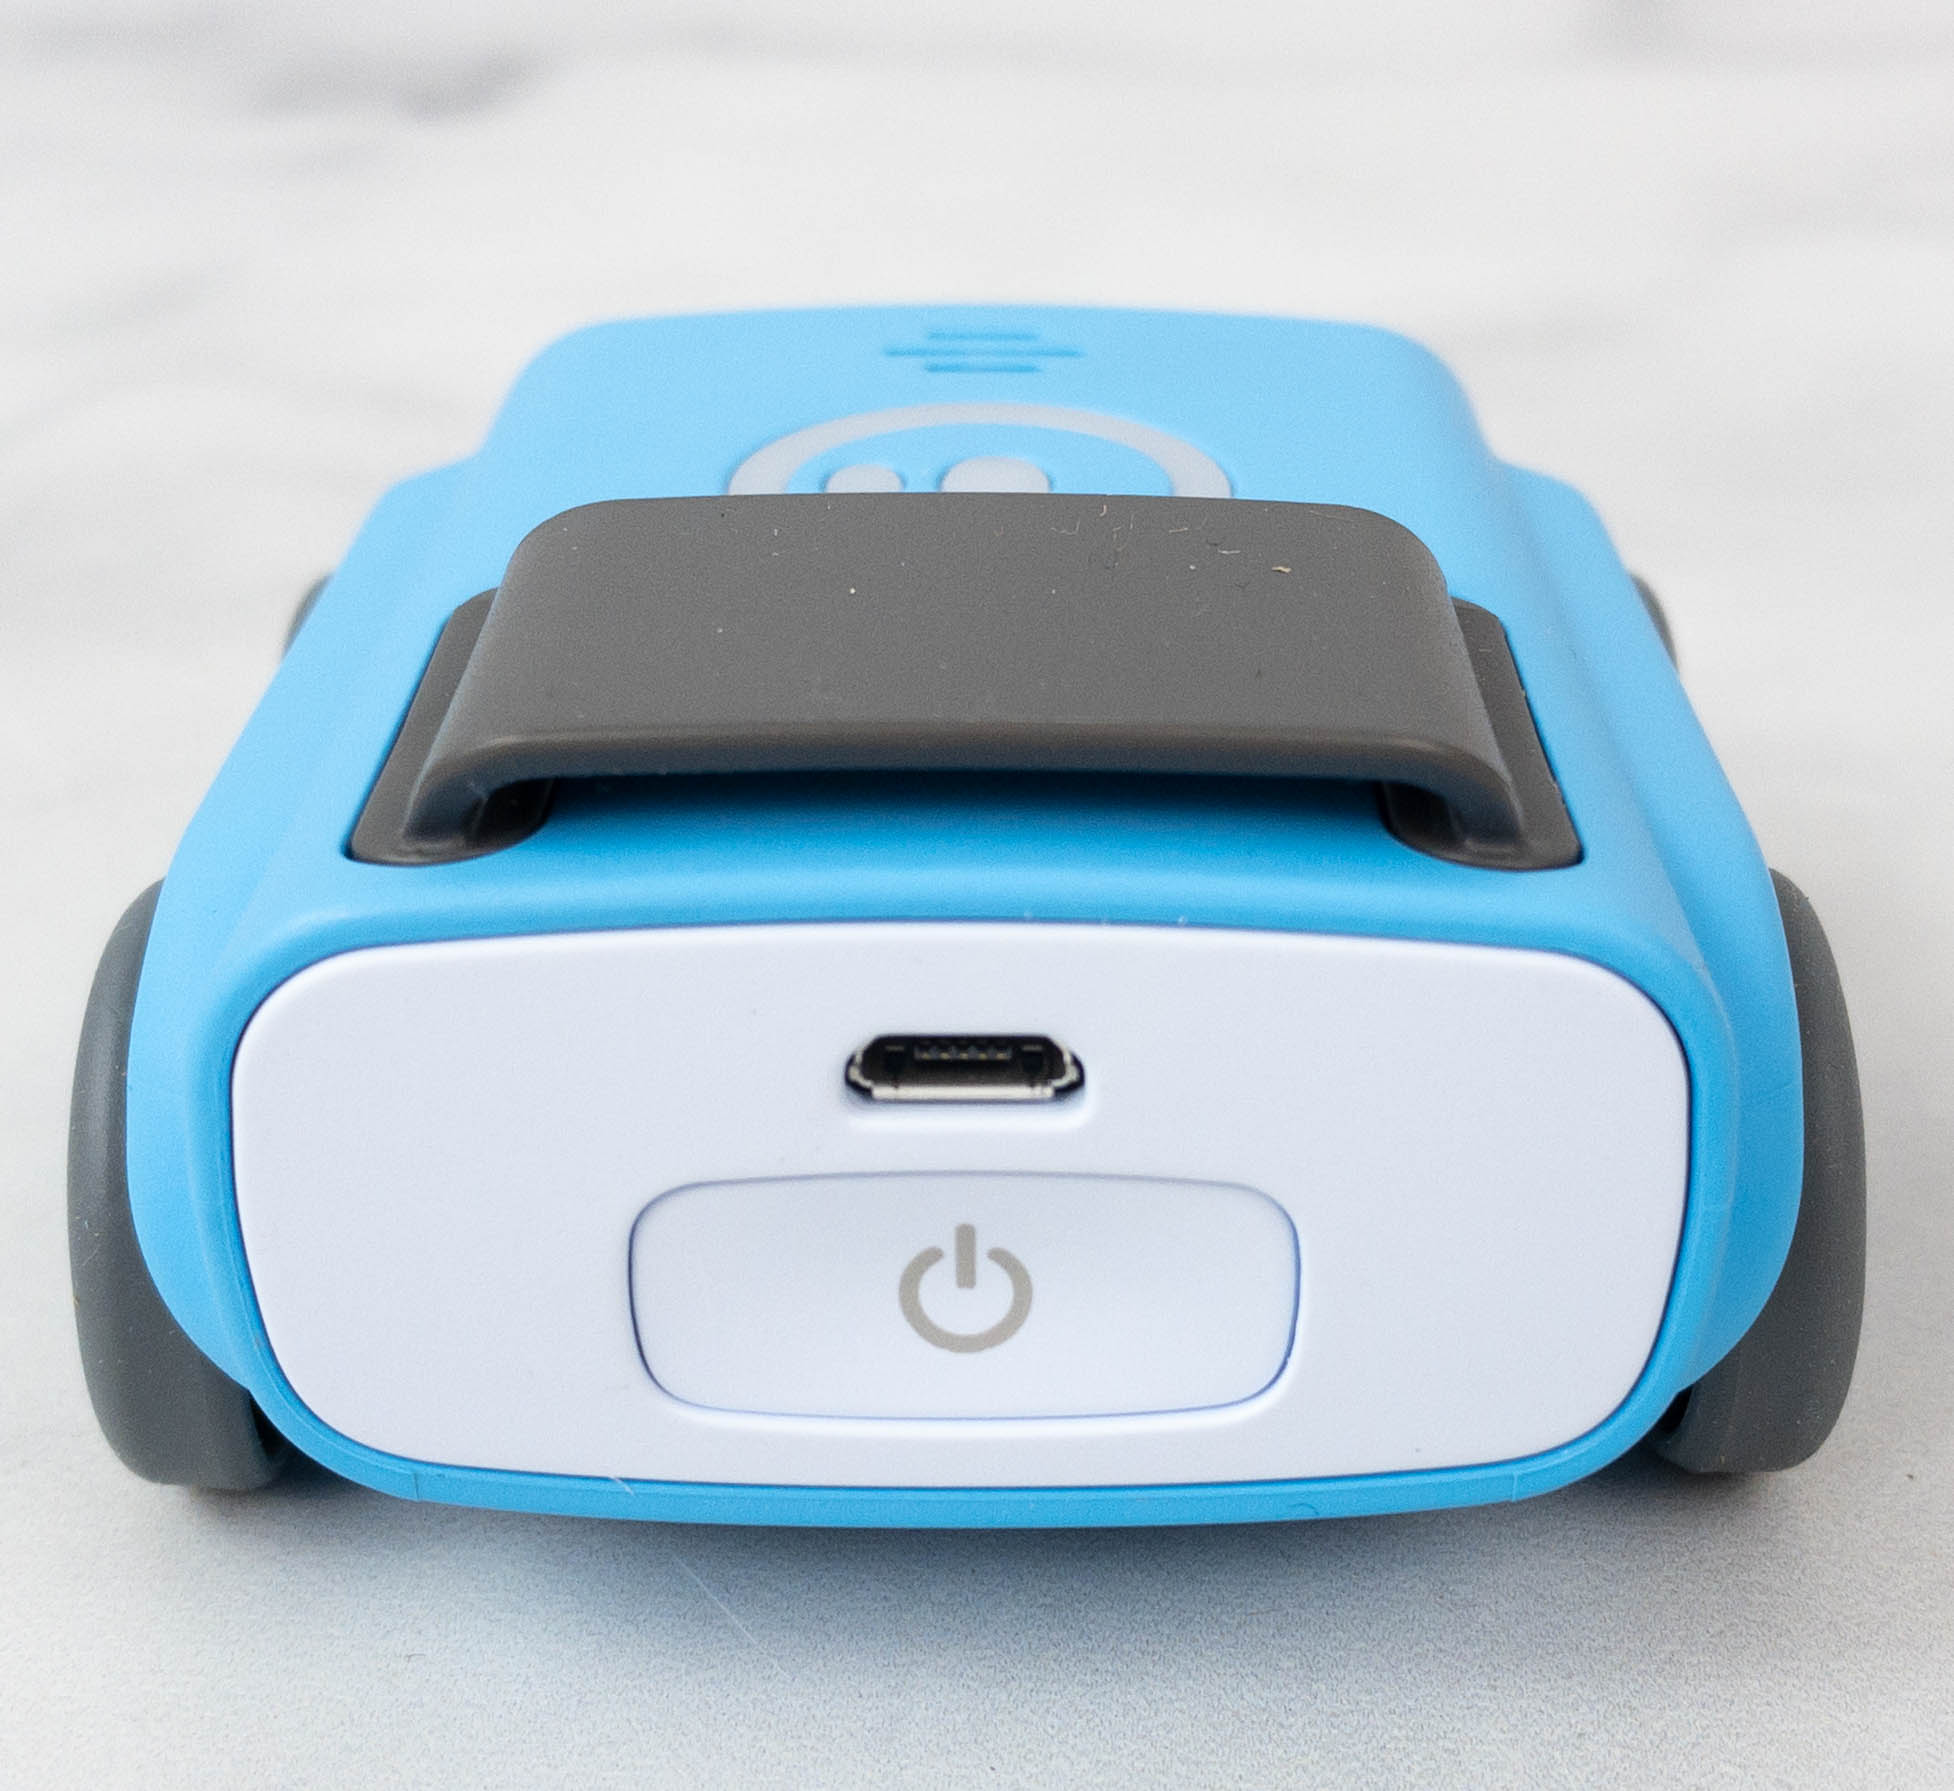 Screenless Coding & Learning Robot for Kids, indi Robot Car